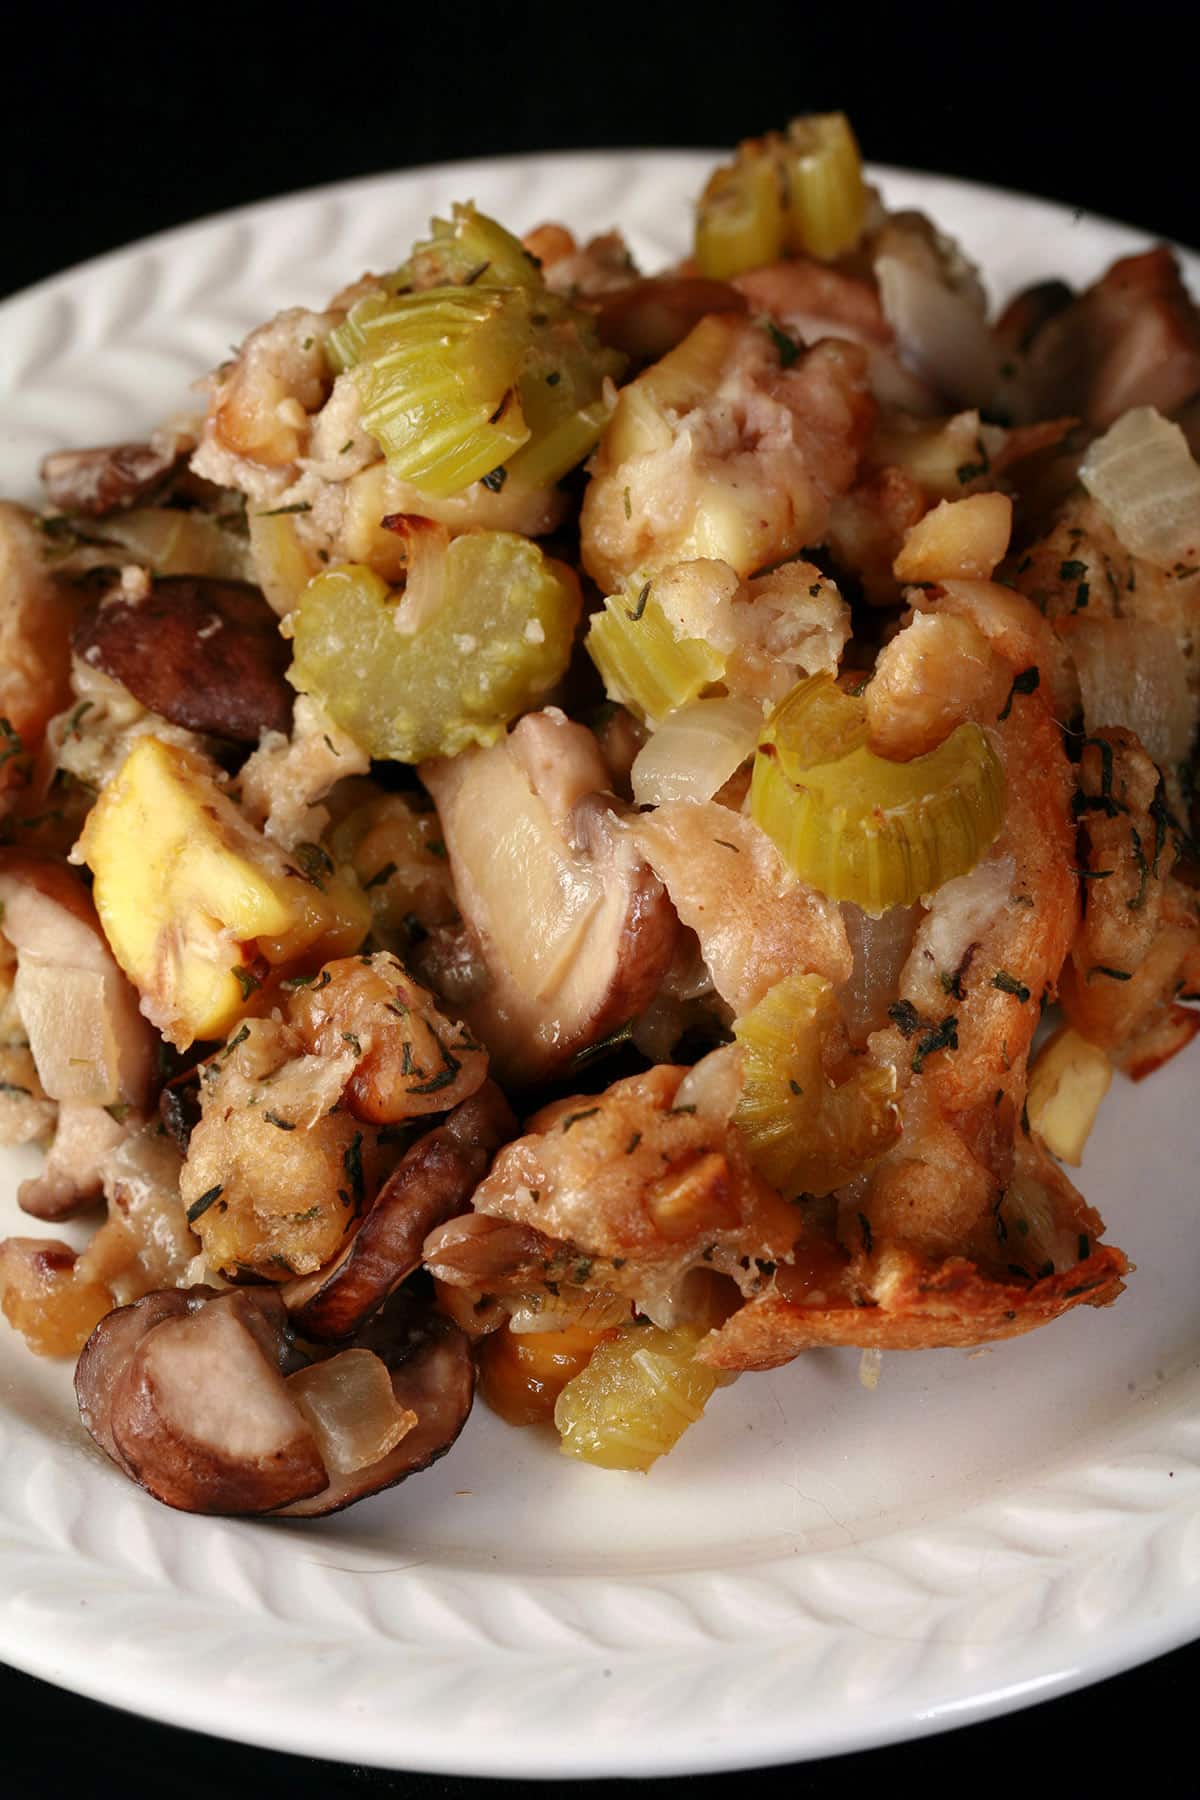 A close up view of a plate of stuffing with chestnuts, mushrooms, and celery visible.